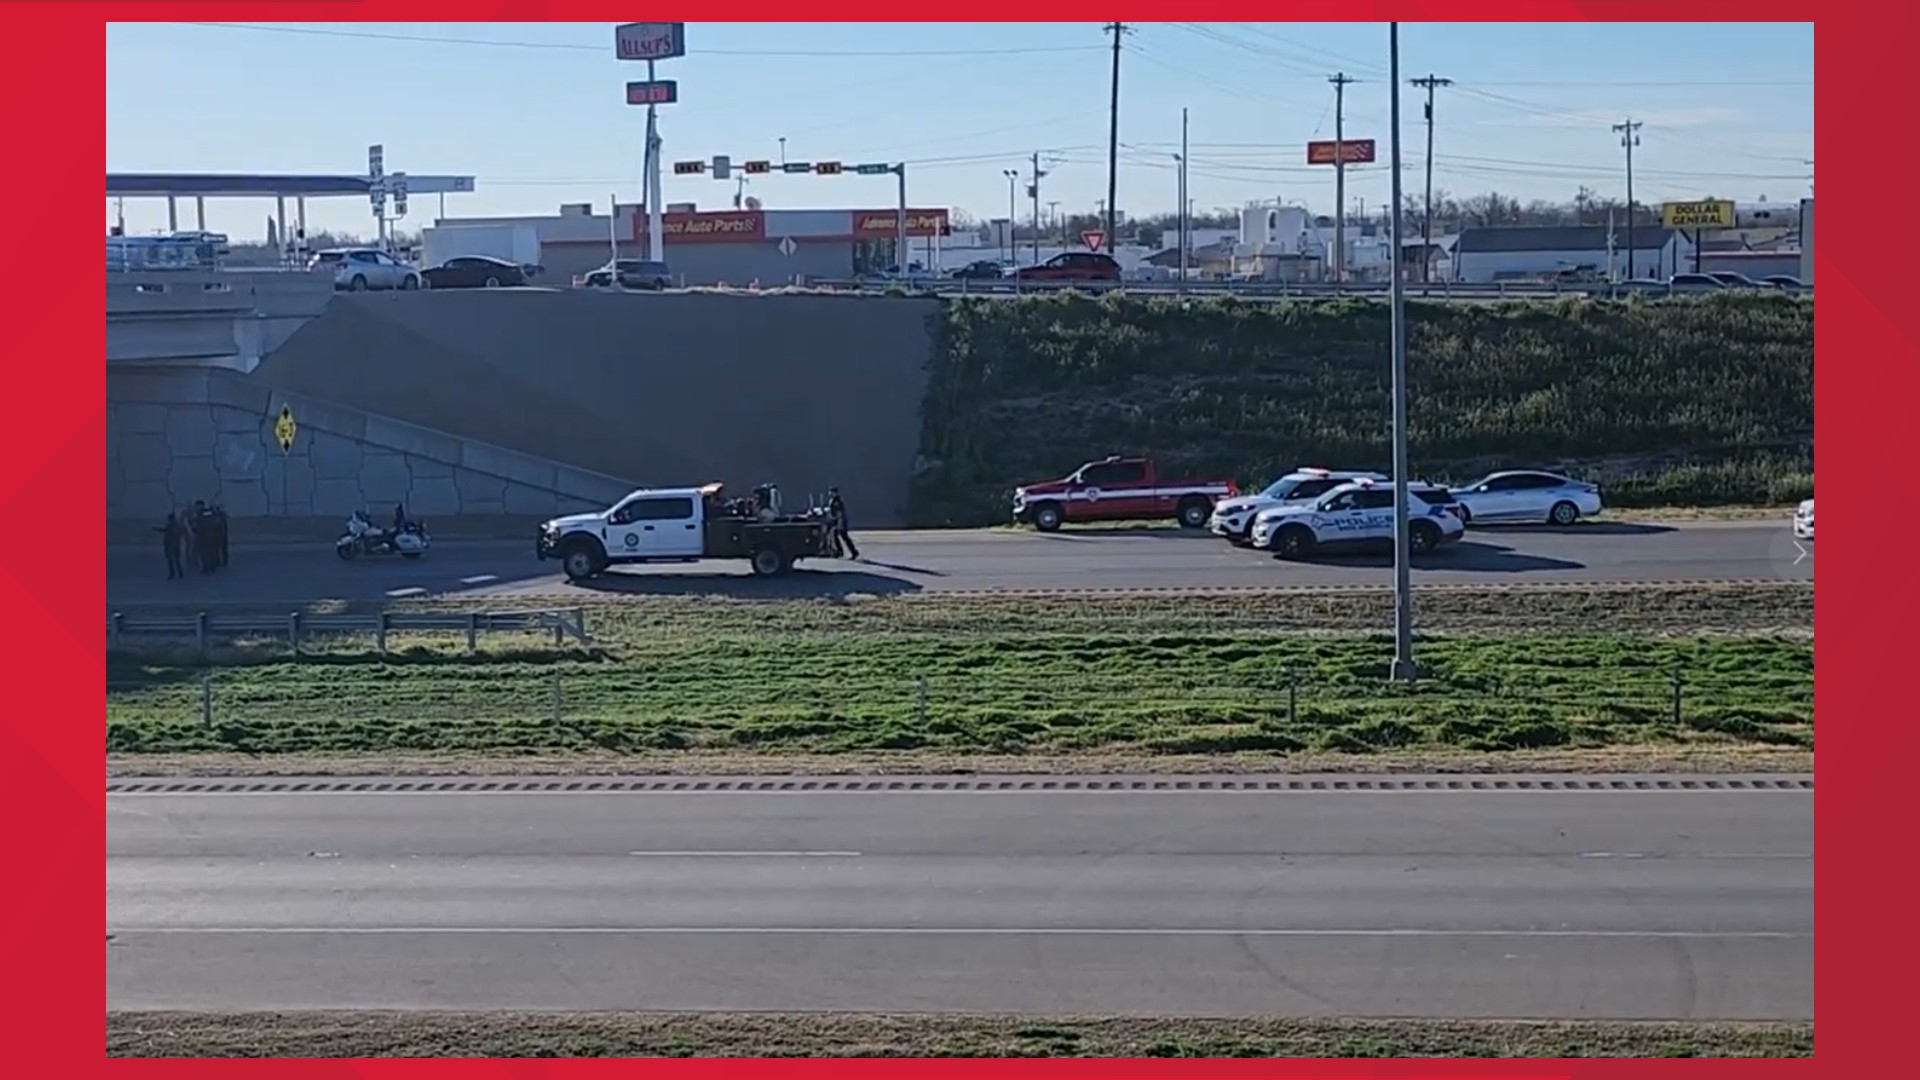 The San Angelo Police and Fire departments were on scene for an incident on the Houston Harte Expressway